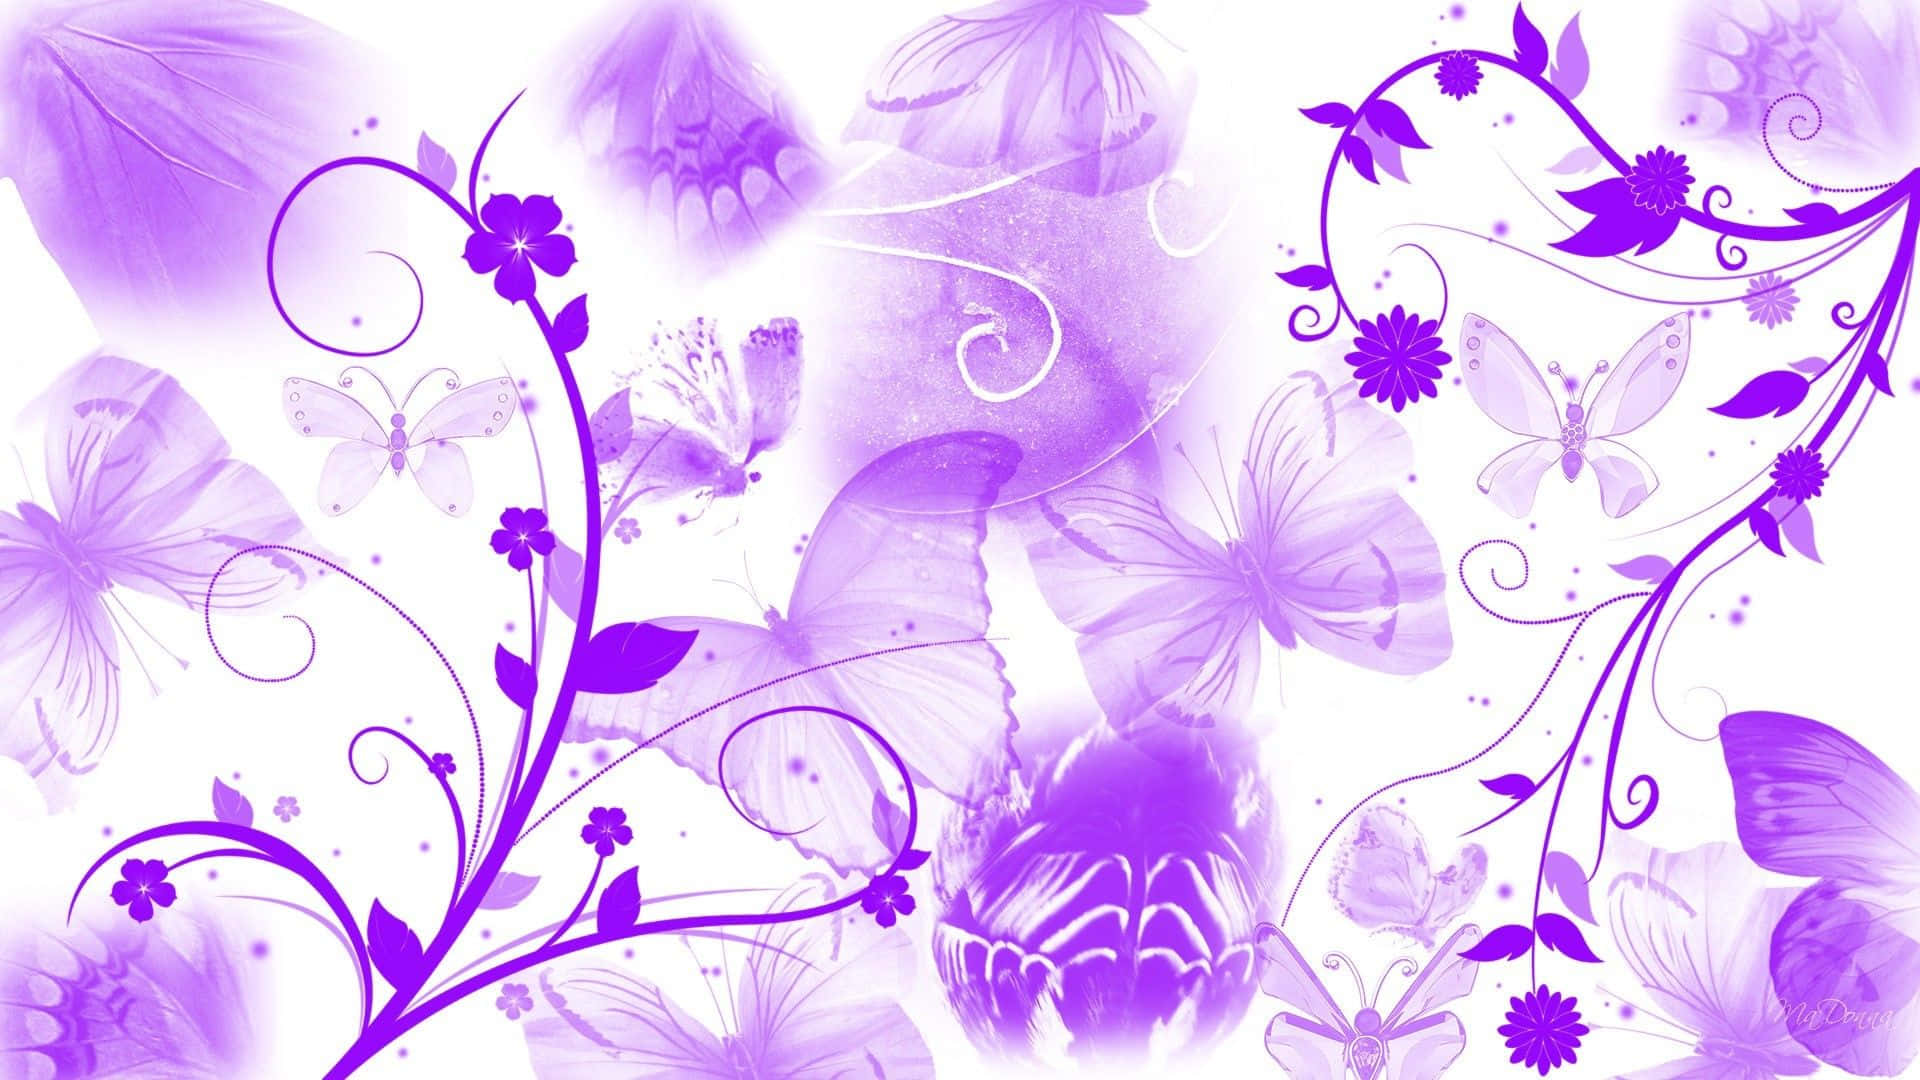 A vibrant purple and white background with a floral pattern and sparkle accents.